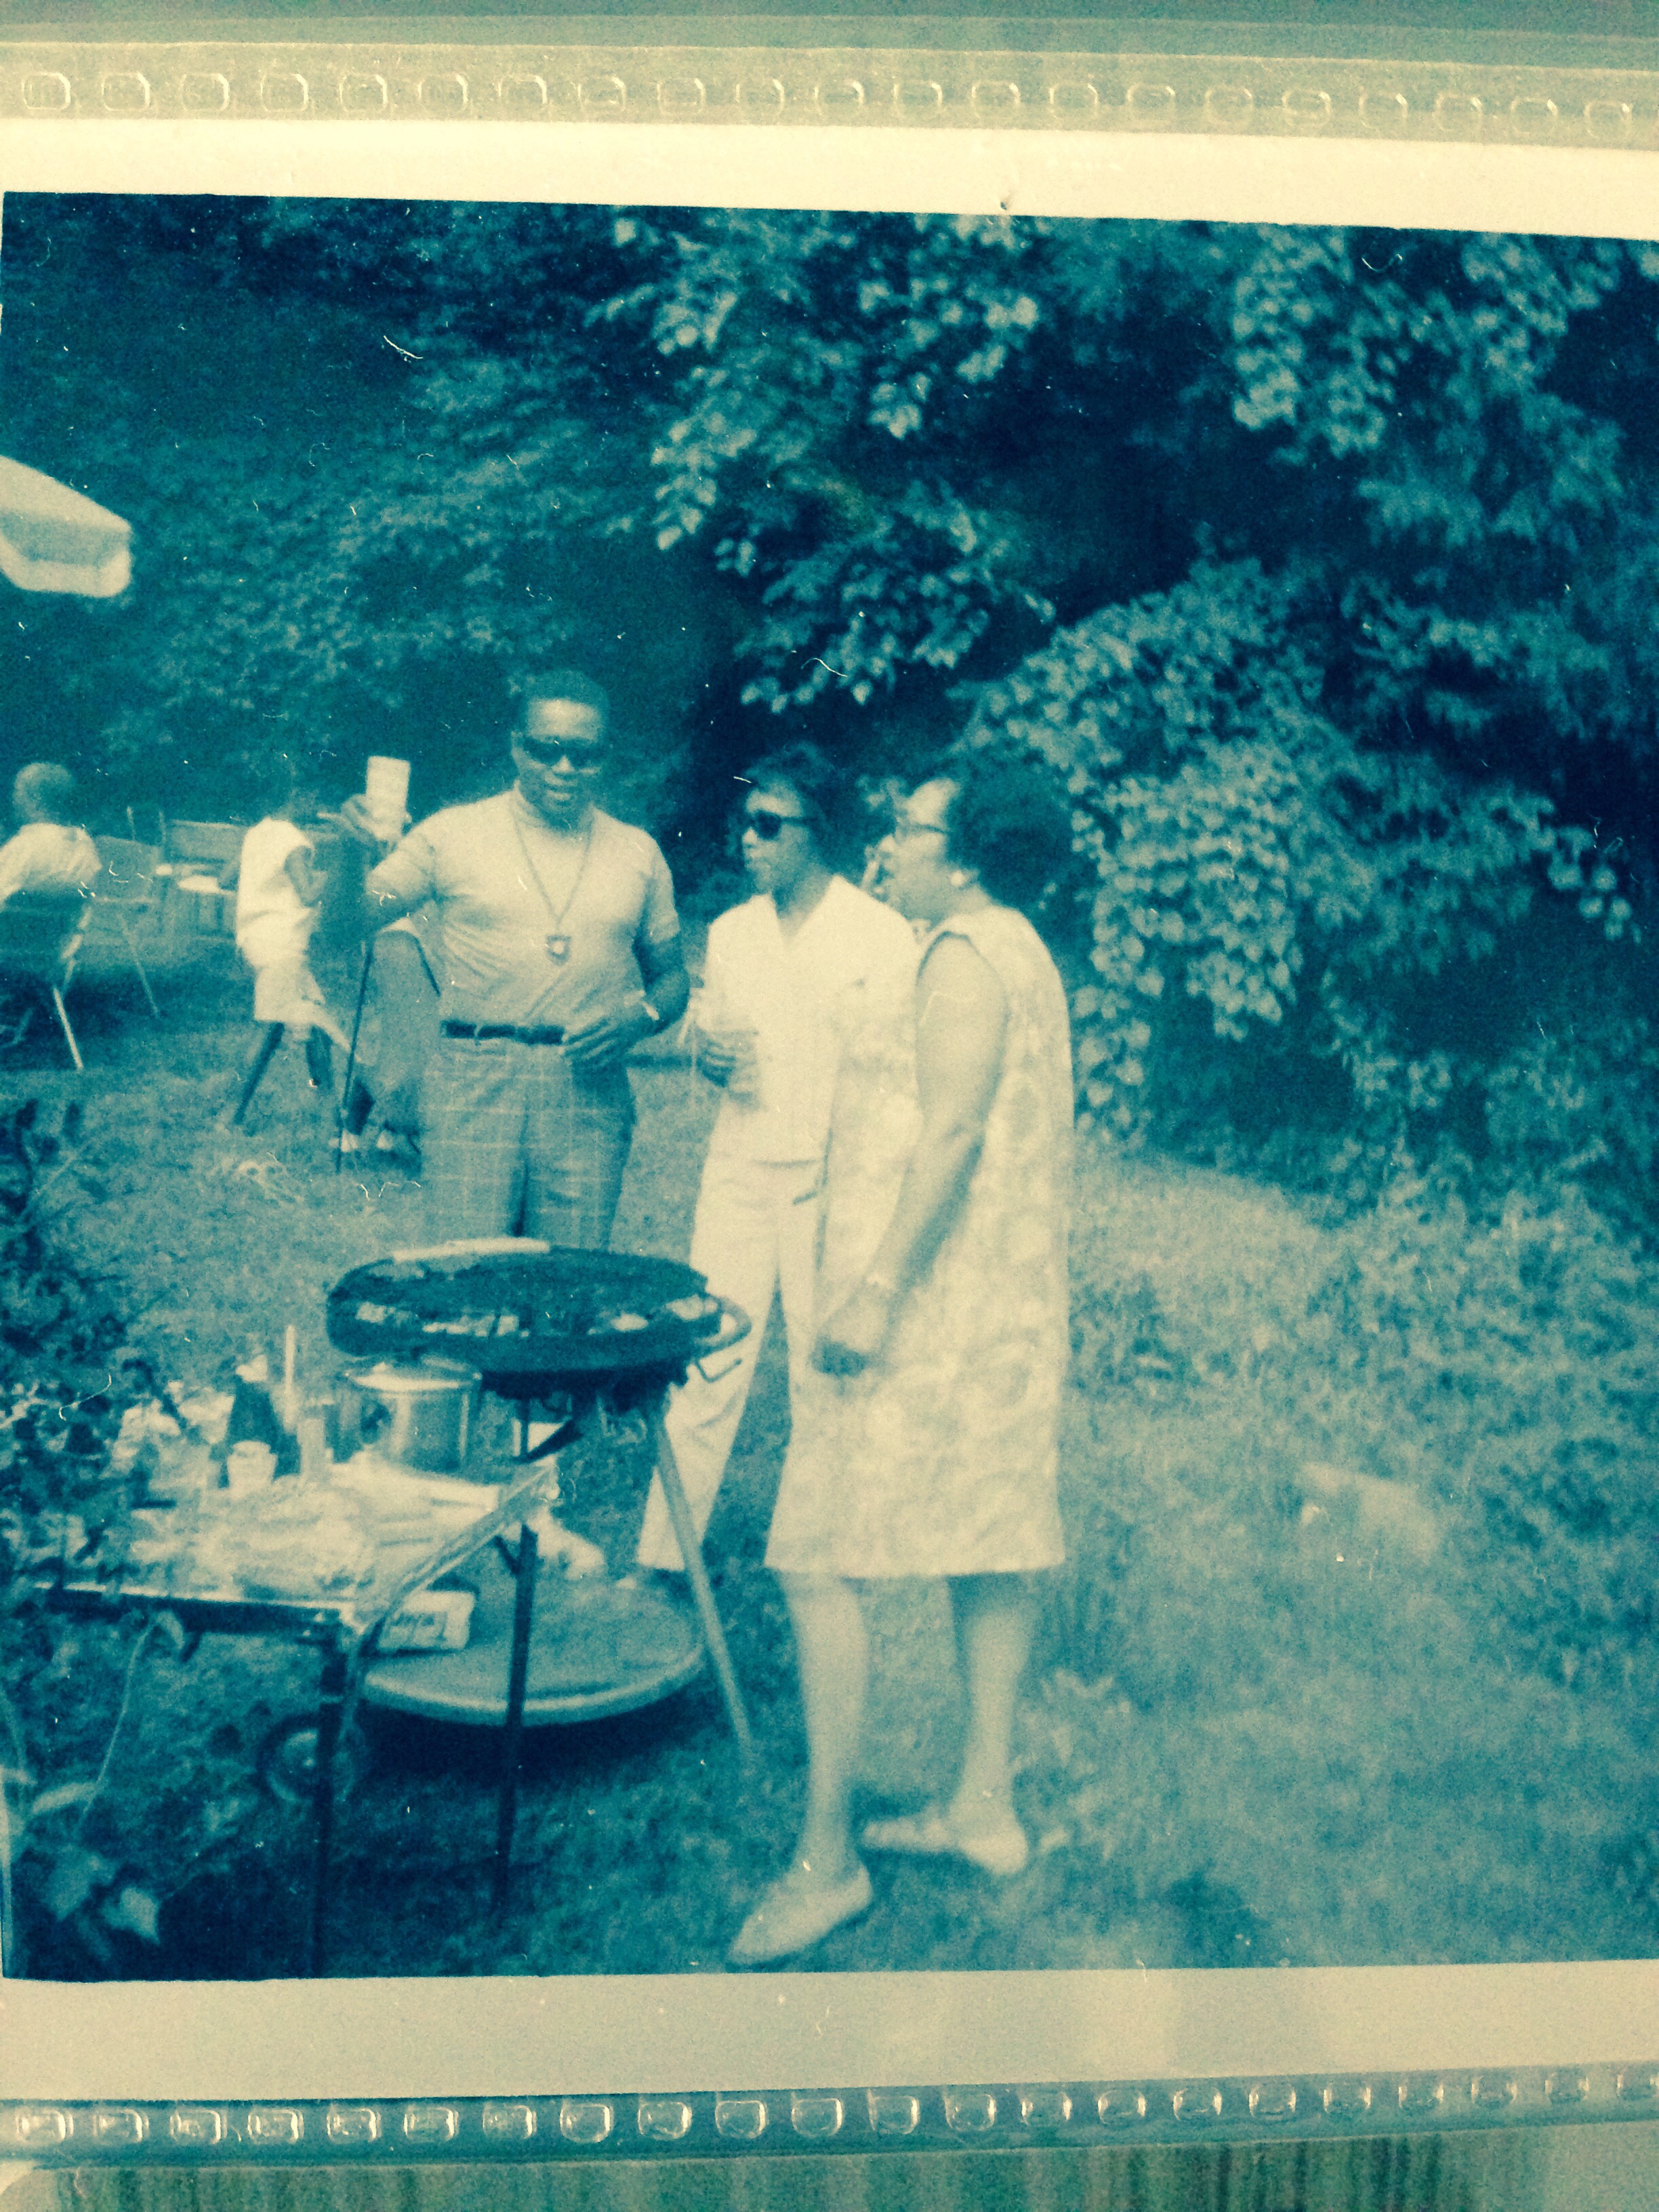 My parents and grandmother at the annual cookout